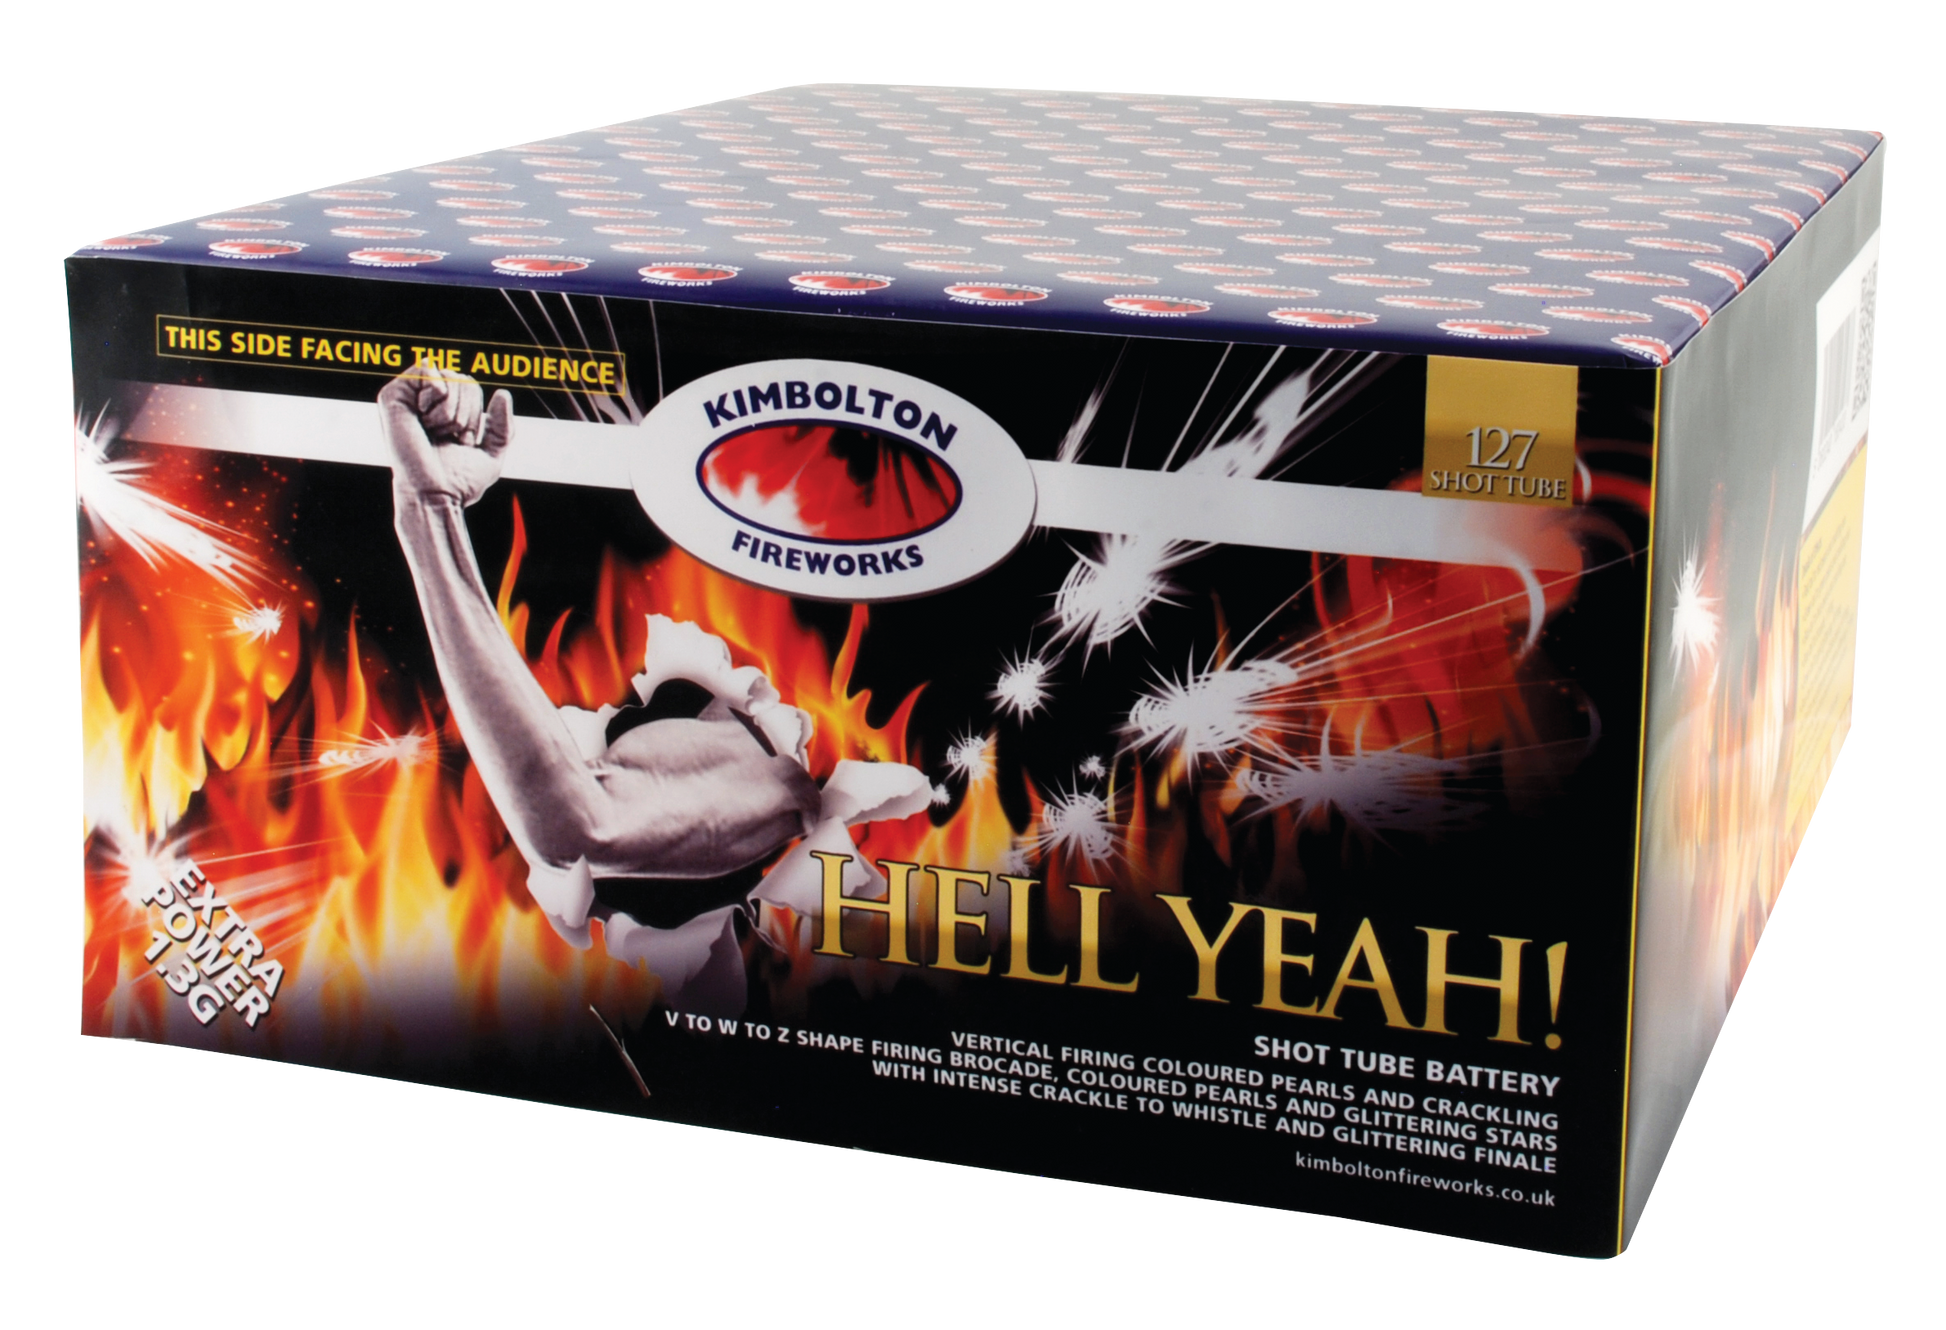 Hell Yeah! by Kimbolton Fireworks